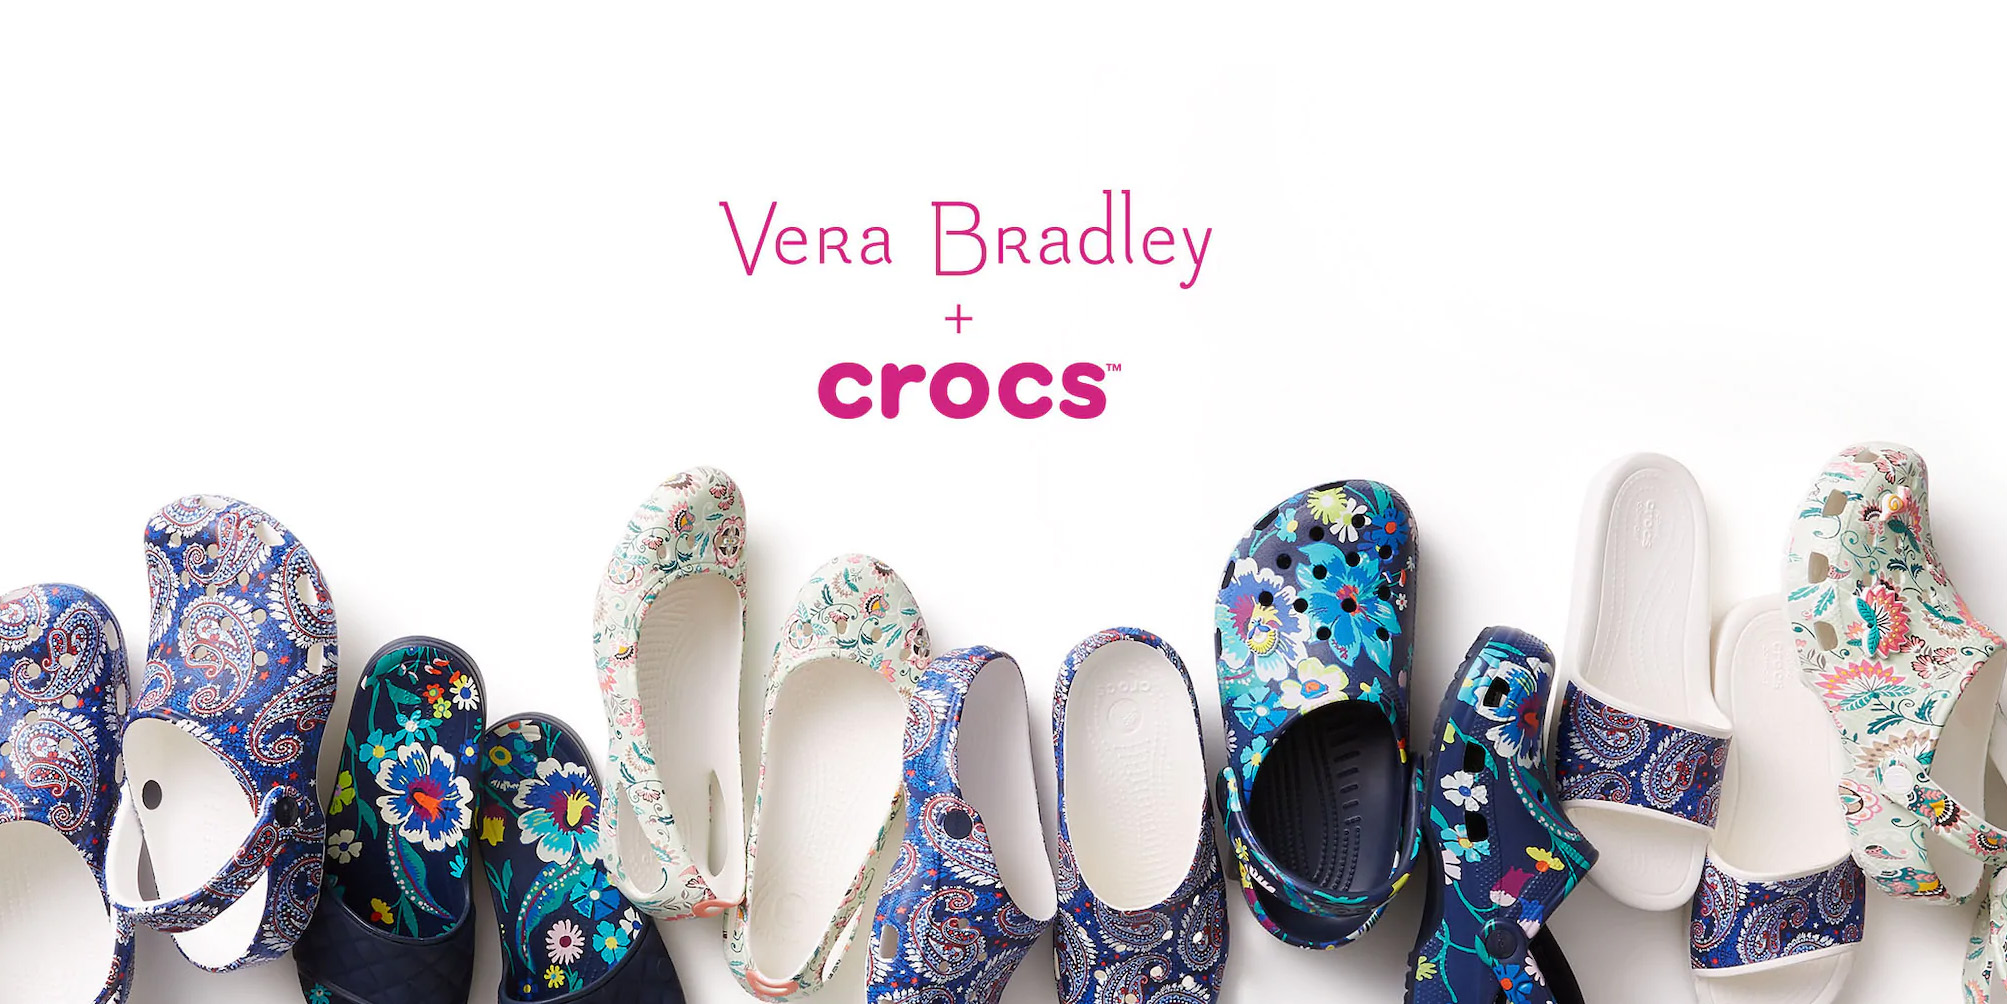 Crocs partners with Vera Bradley for a 